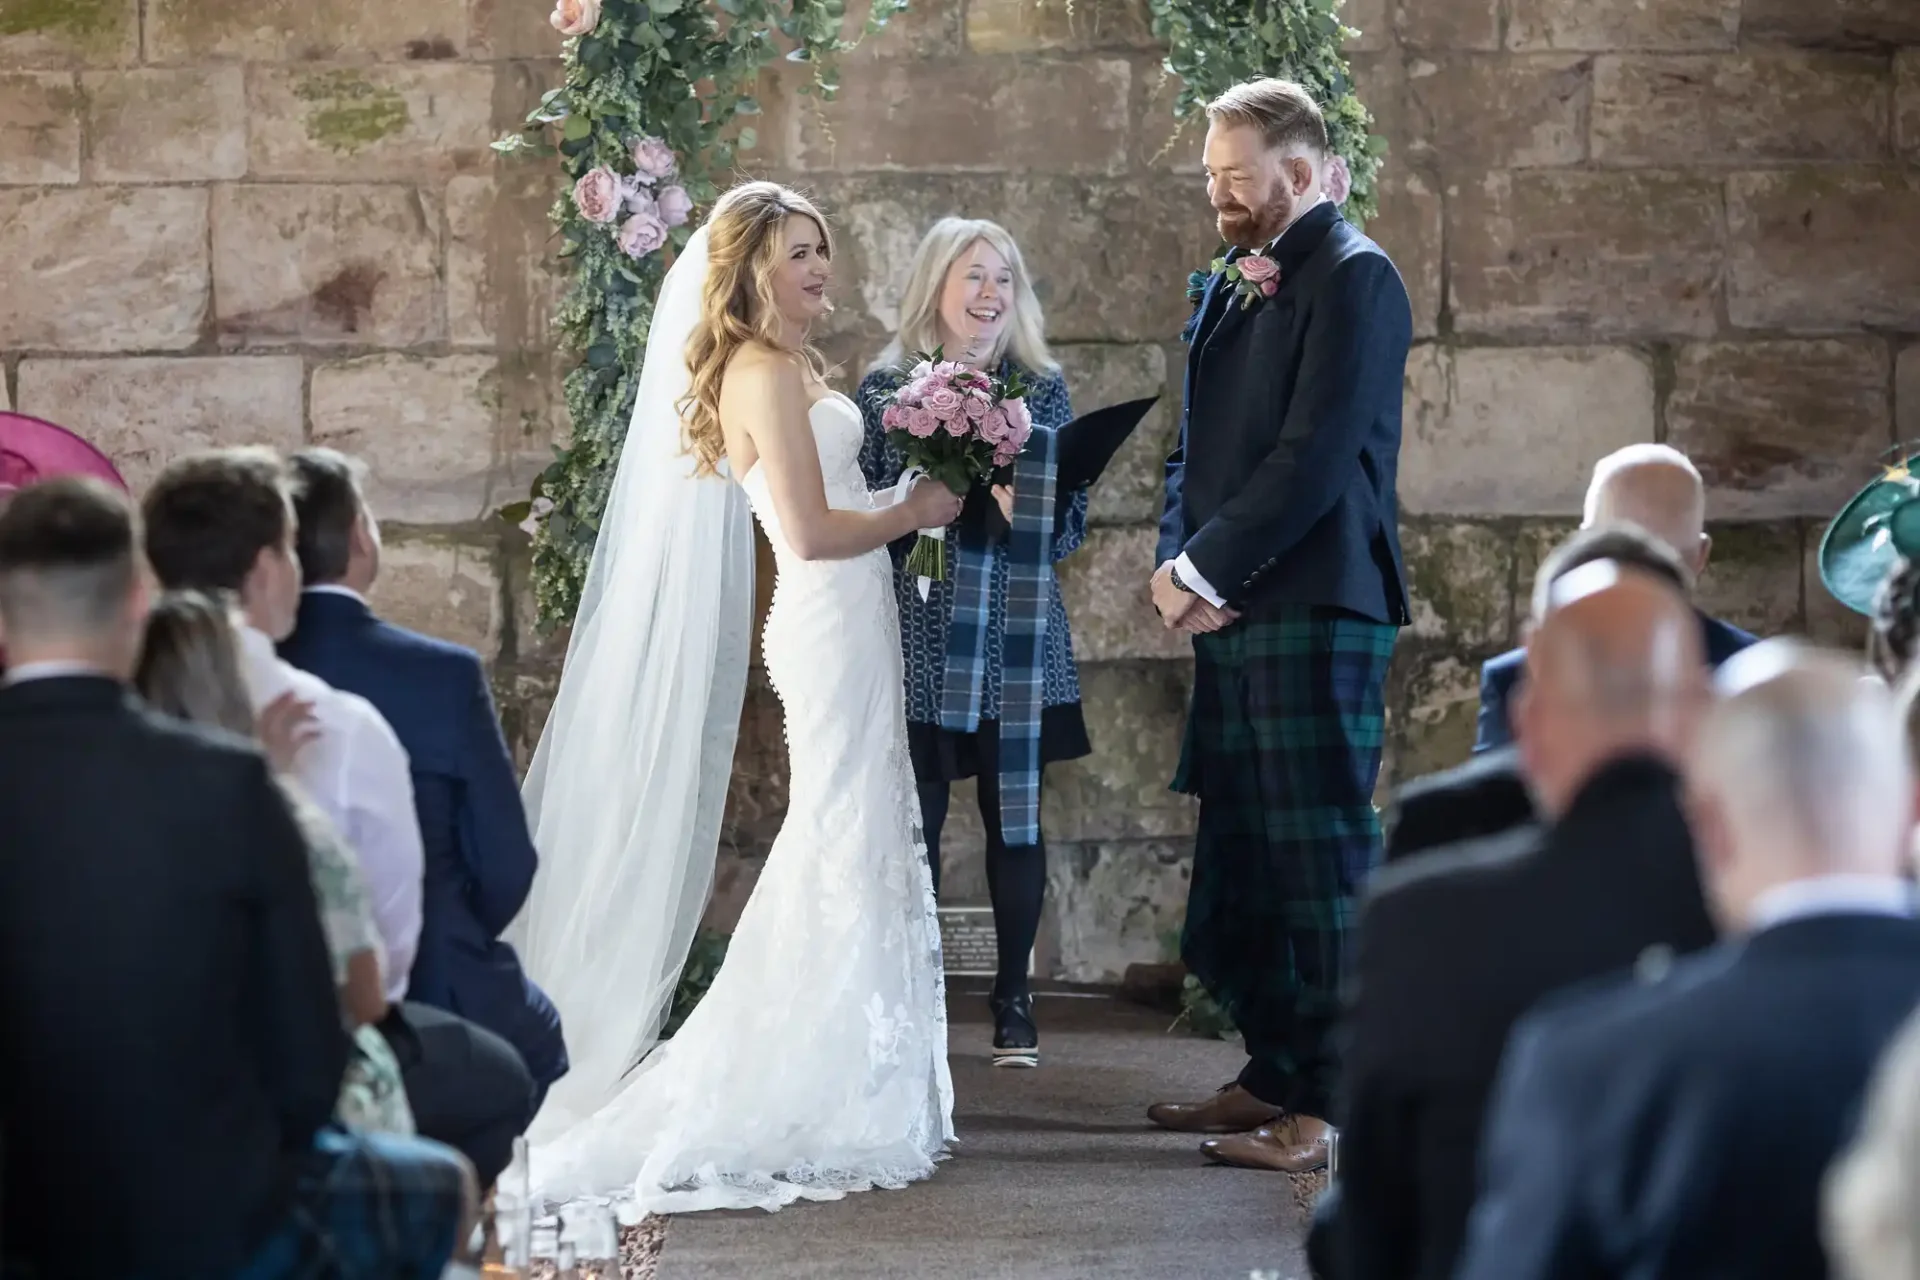 A bride and groom exchanging vows at their wedding ceremony, officiated by a woman, with guests in formal attire watching in a stone-walled venue decorated with flowers.